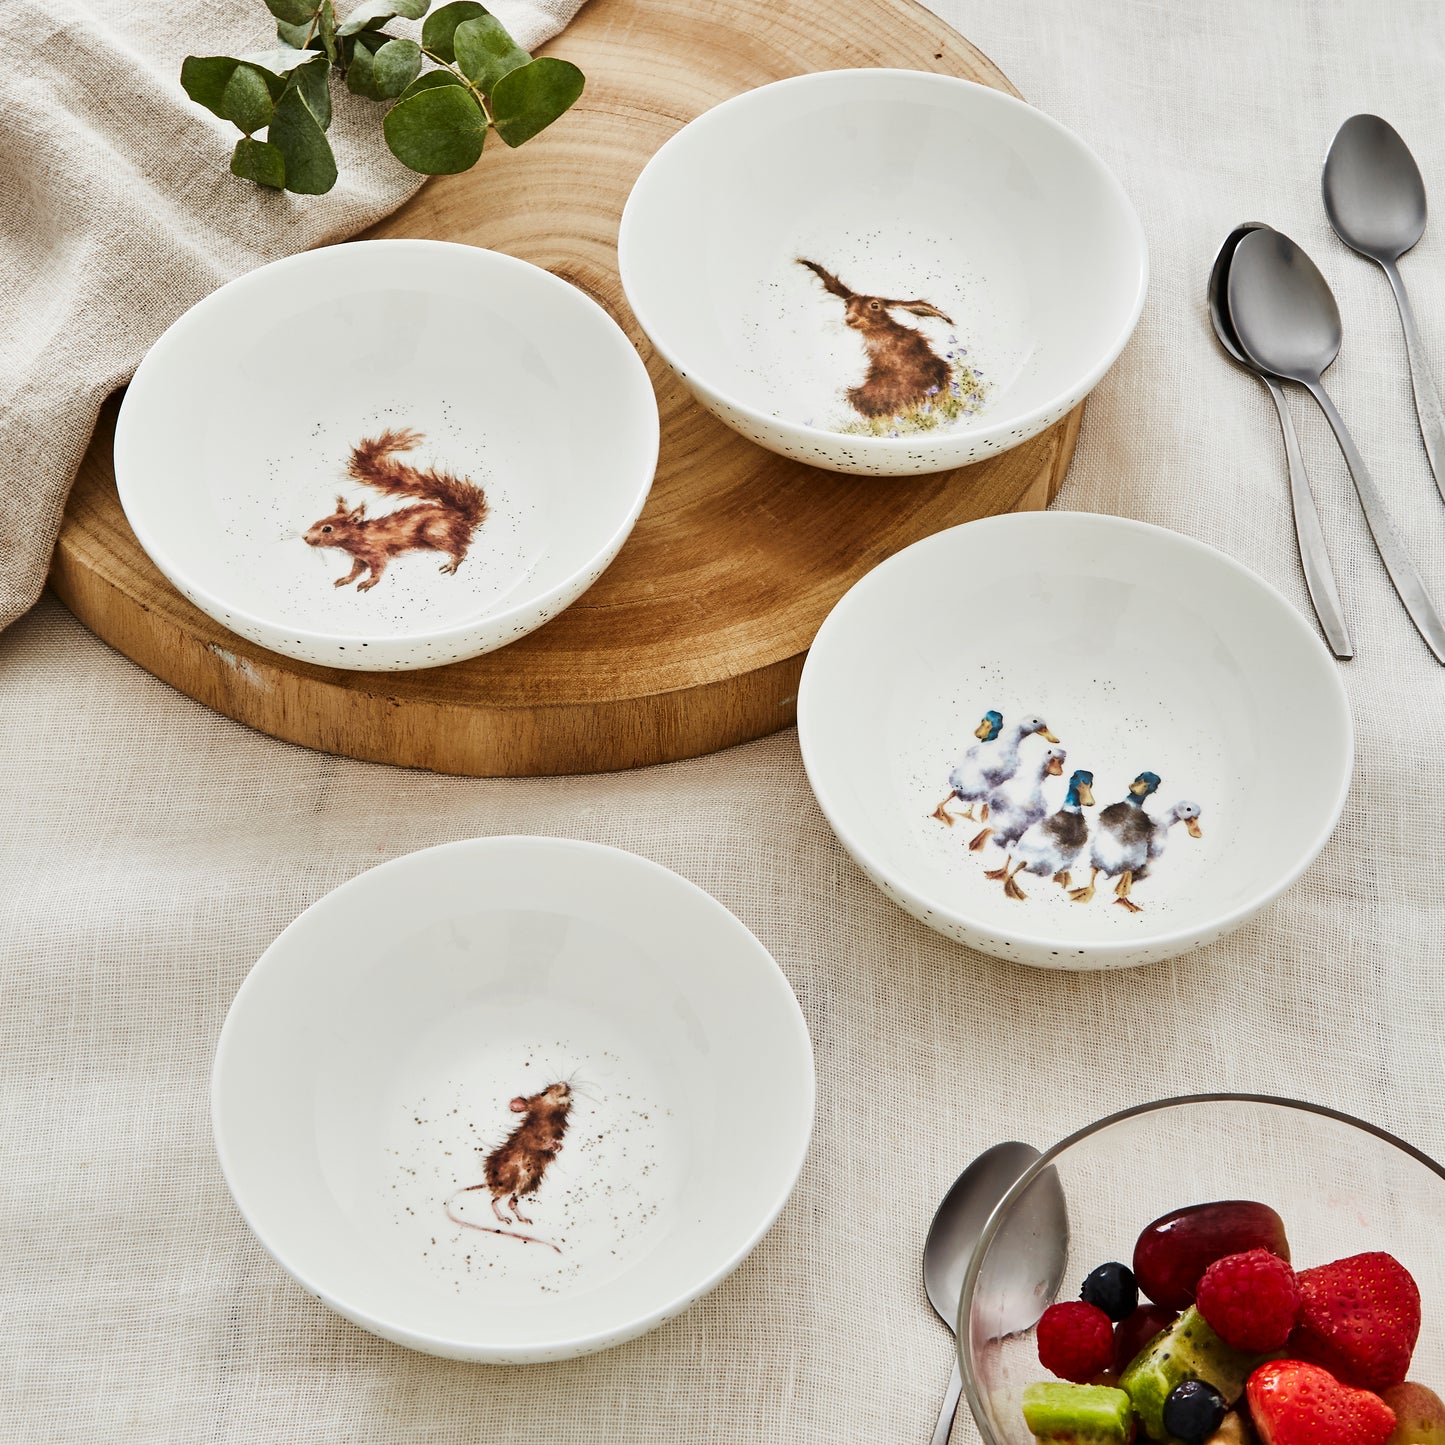 Royal Worcester Wrendale Designs Bowls Set of 4 Duck, Hare, Squirrel and Mouse